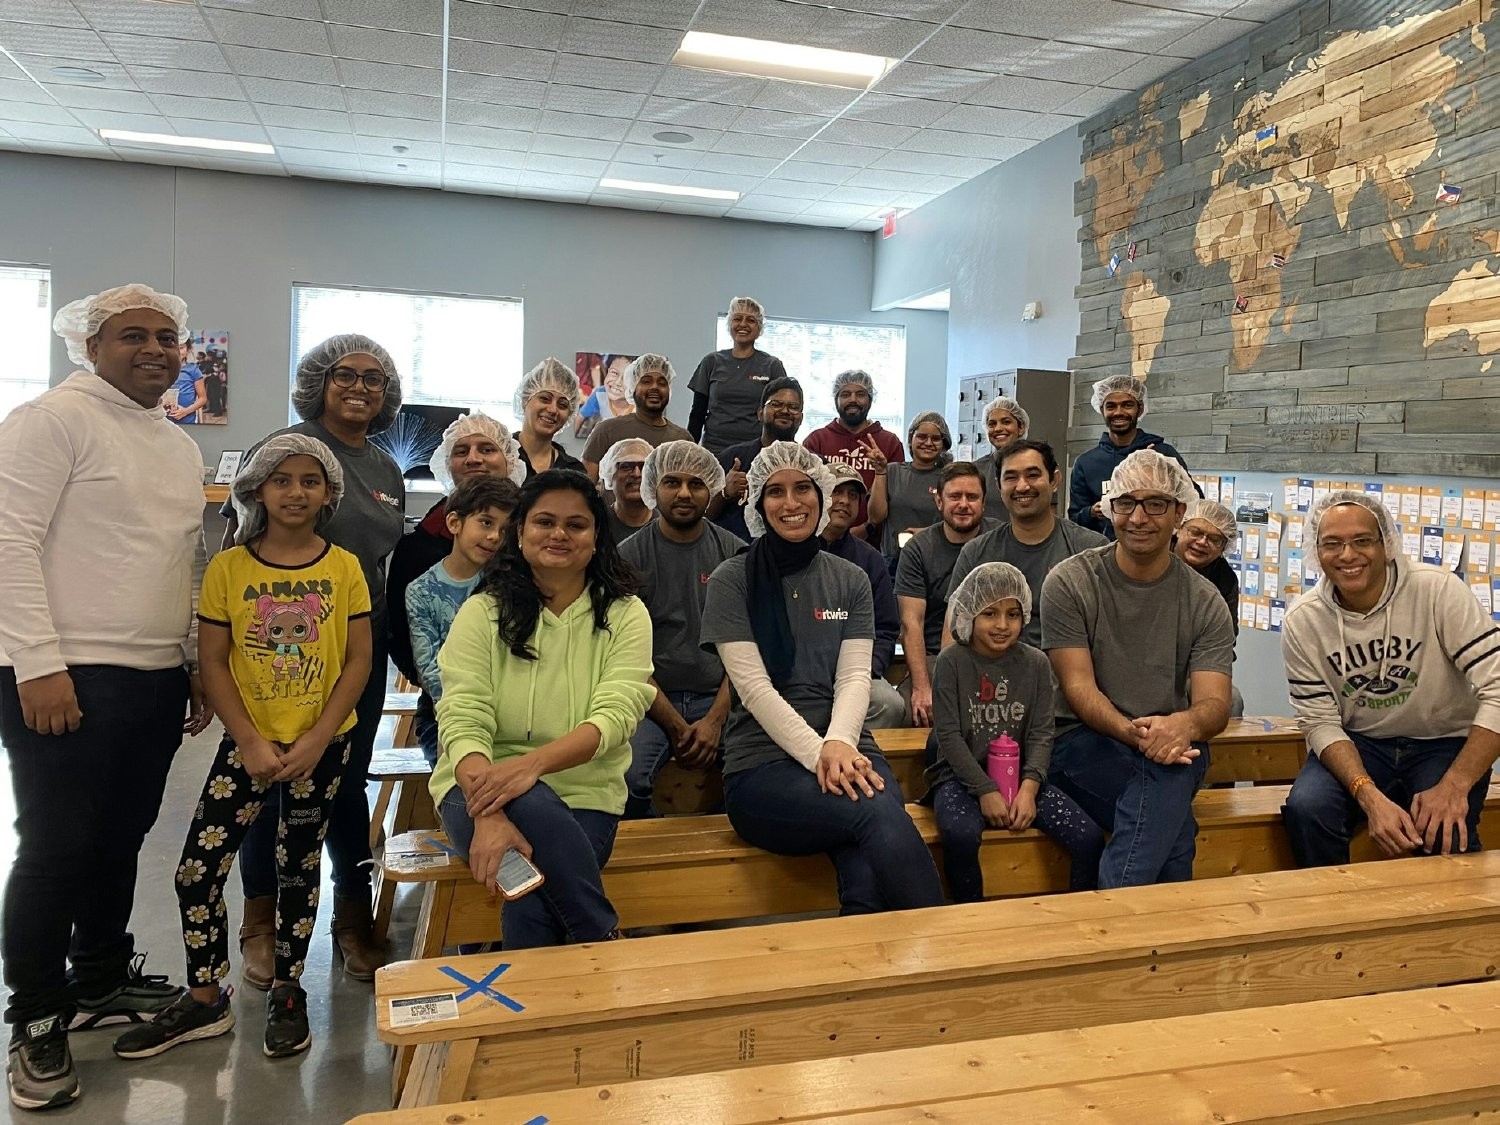 Bitwise Inc. volunteers for a CSR event with family